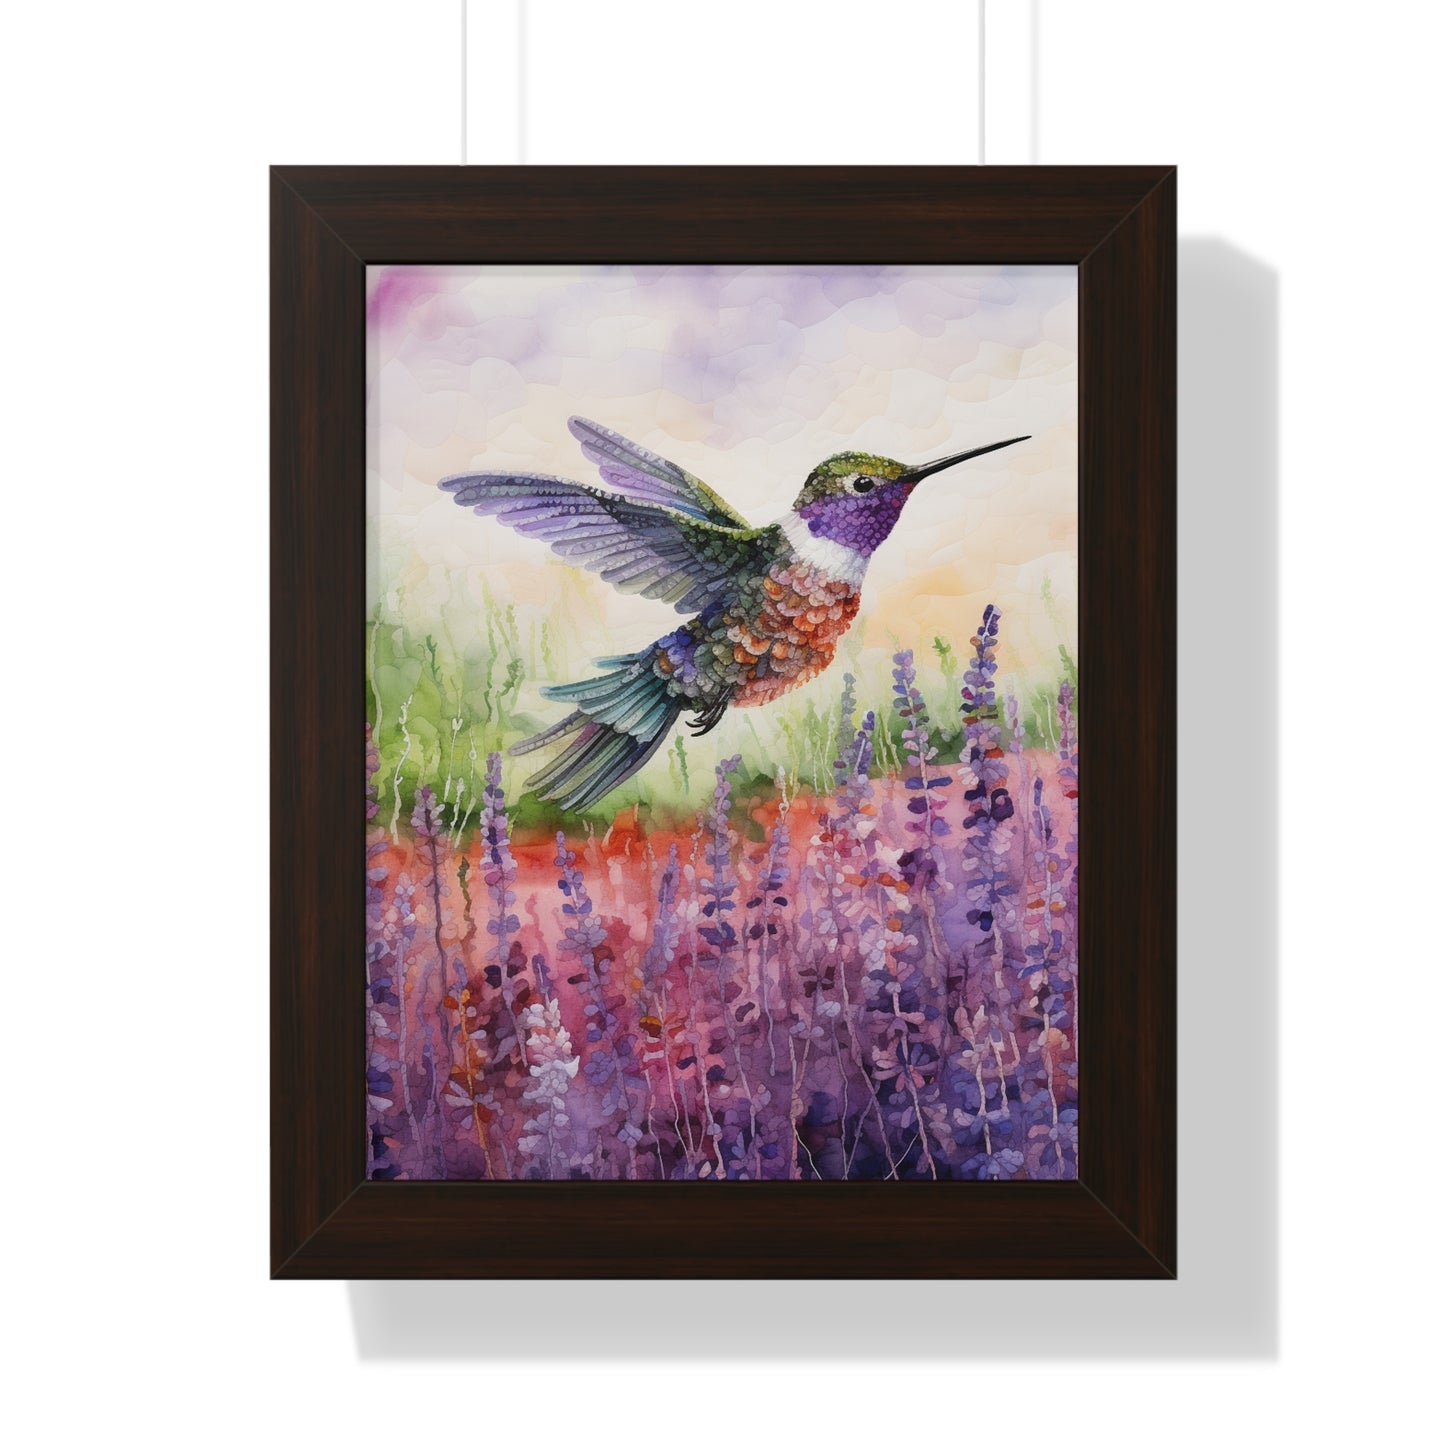 Threaded Wings: A humming's birds dance in a lavender field (Series 3)